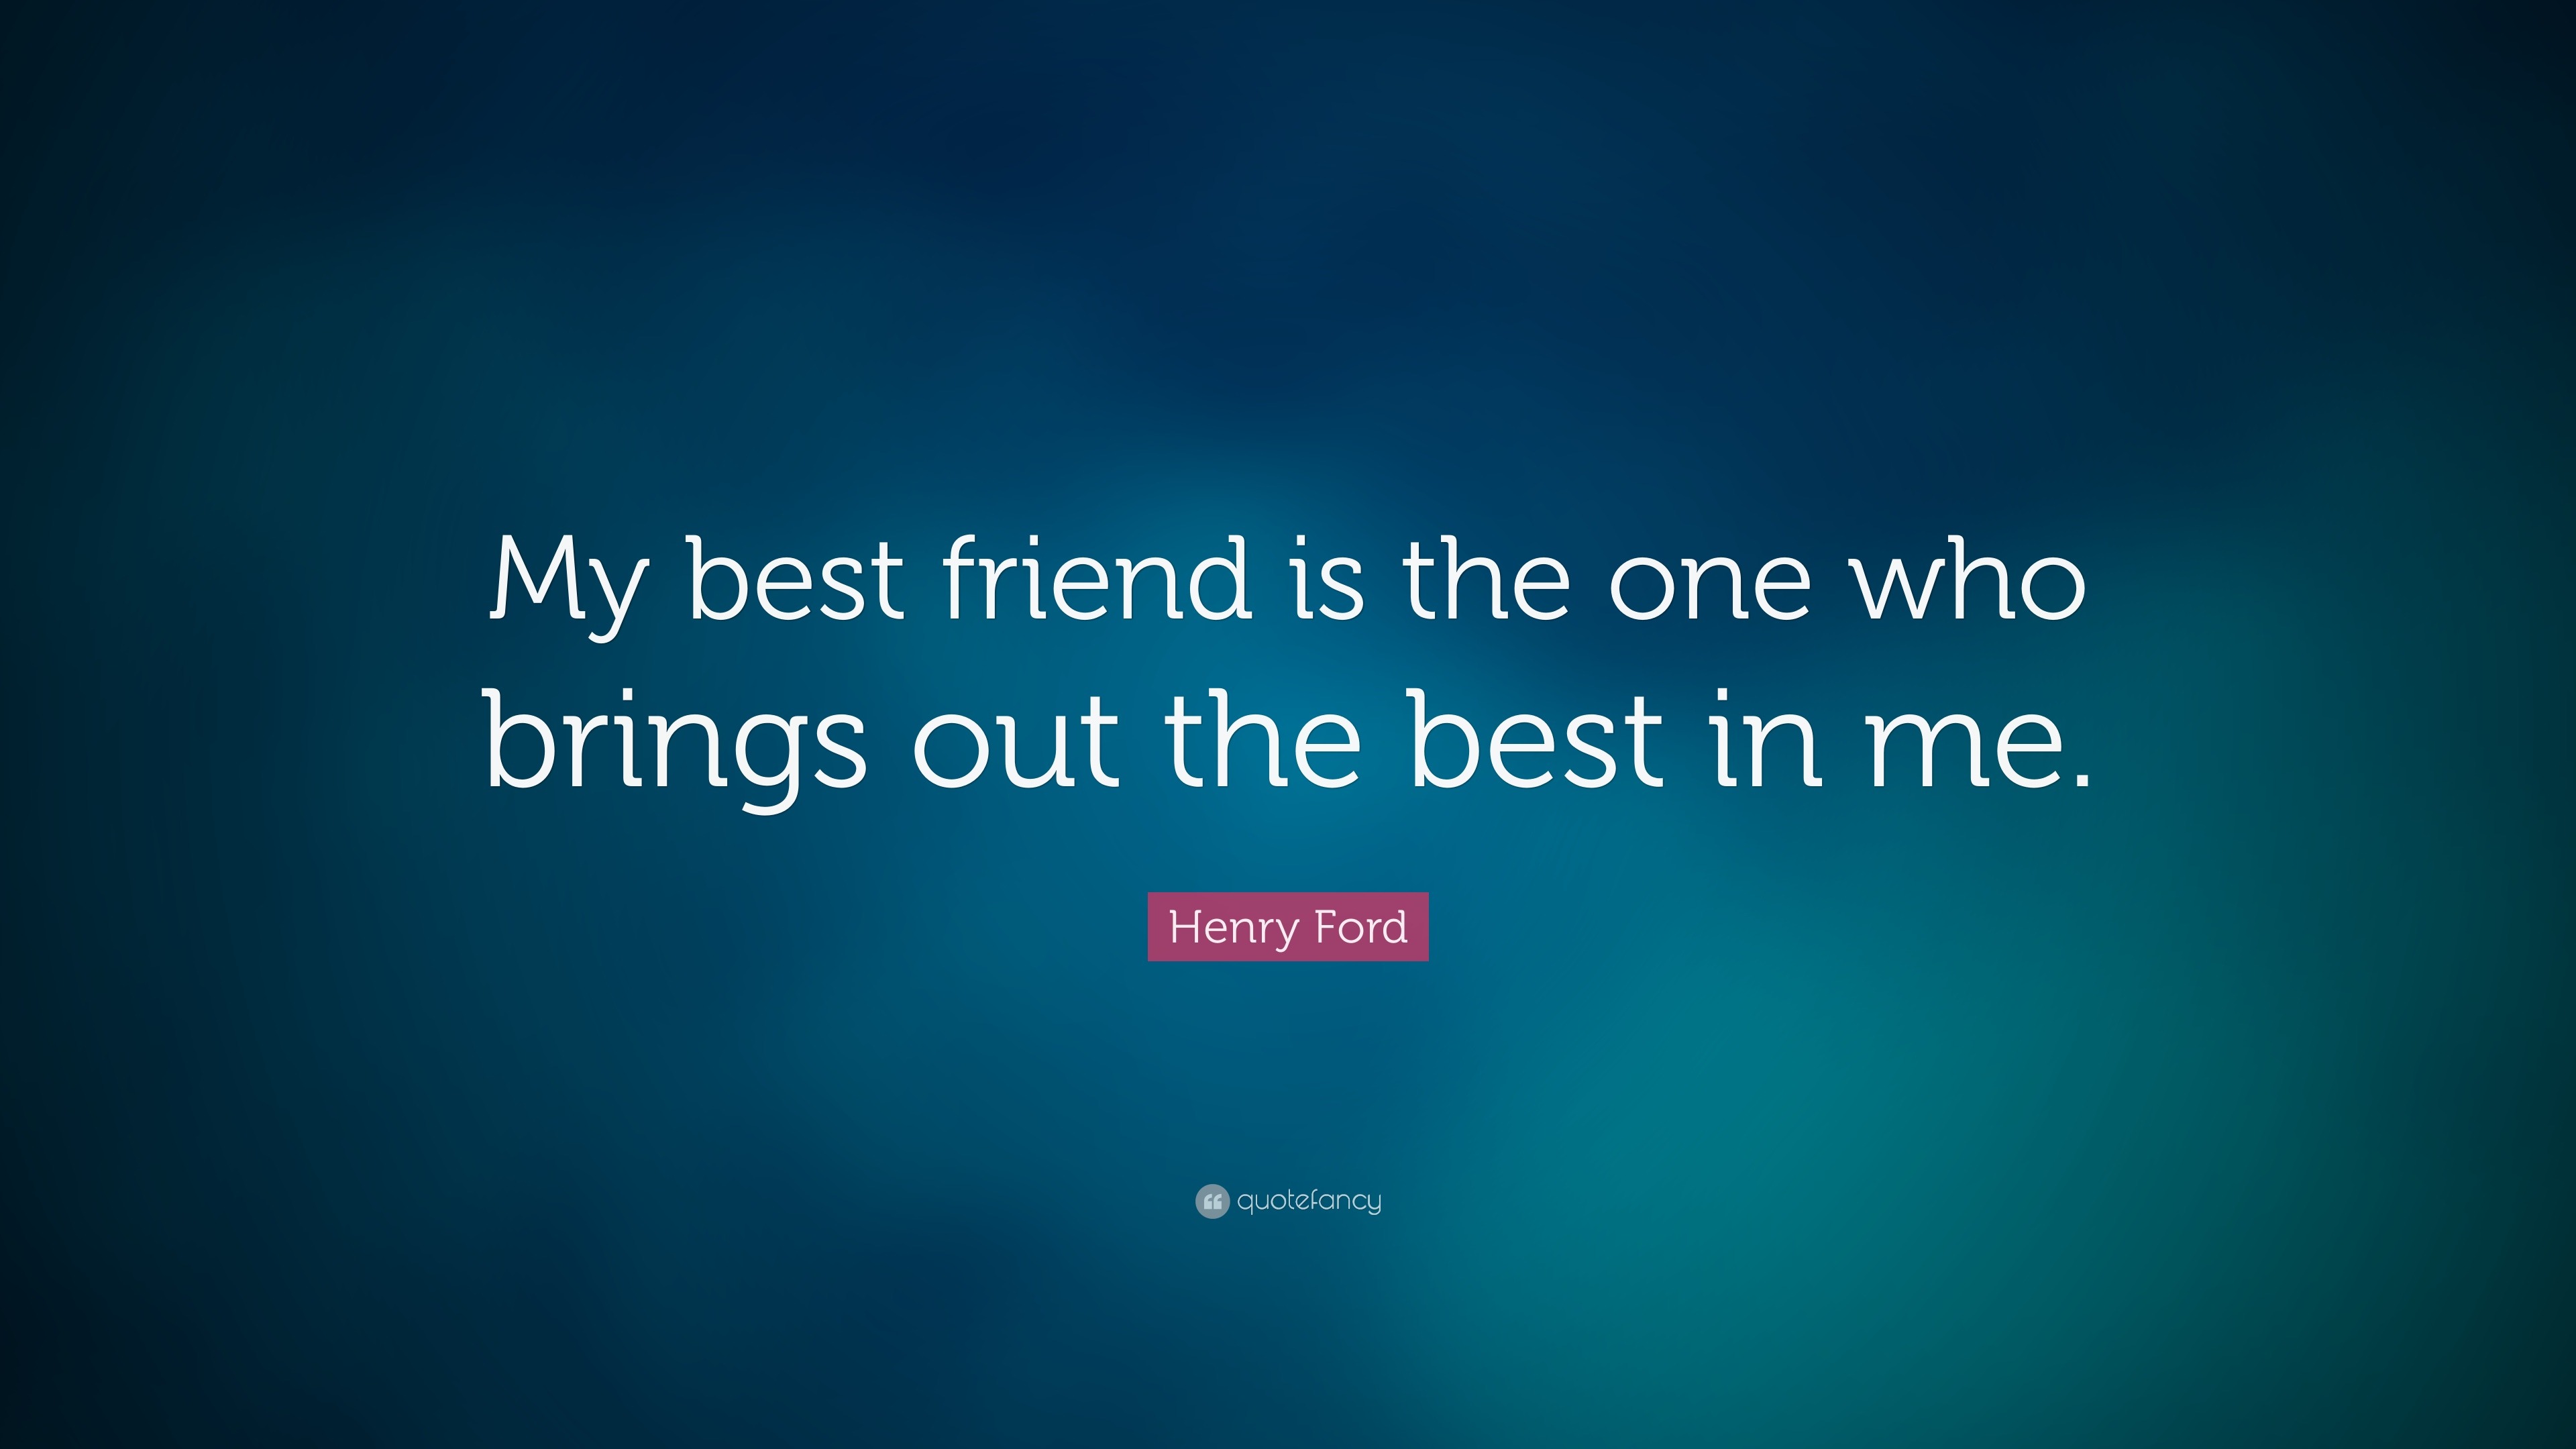 https://quotefancy.com/media/wallpaper/3840x2160/21549-Henry-Ford-Quote-My-best-friend-is-the-one-who-brings-out-the-best.jpg